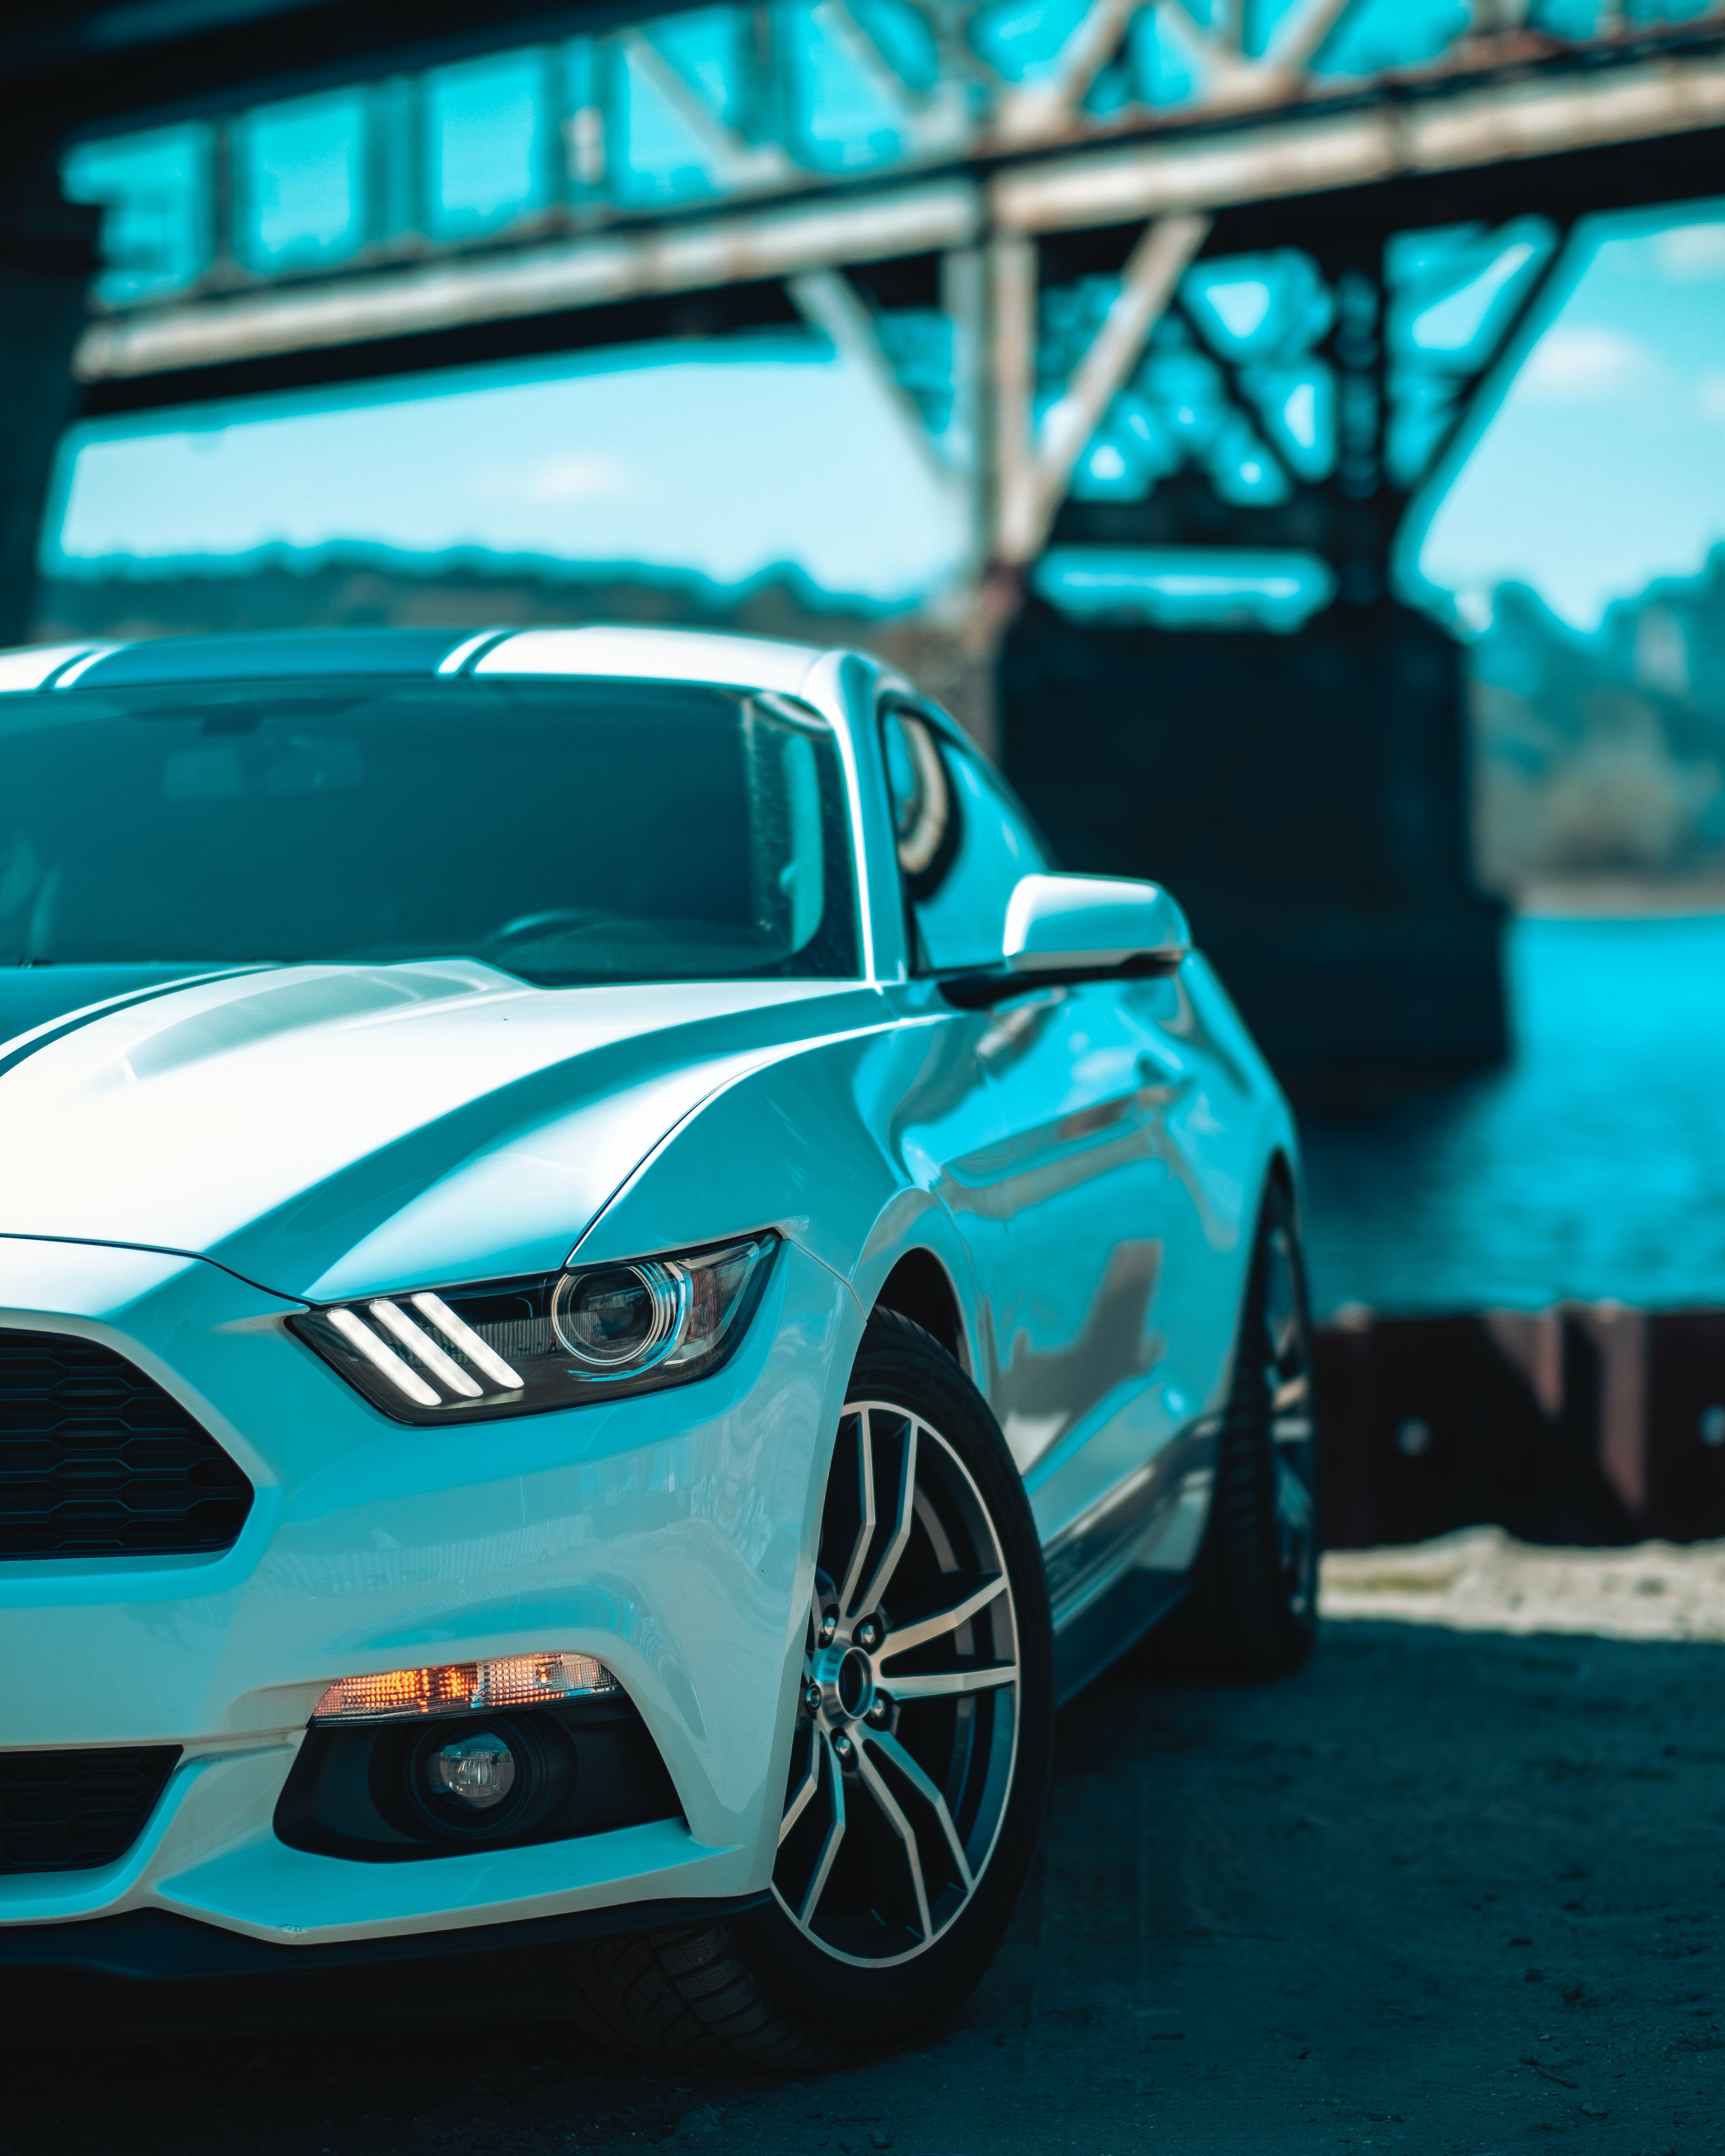 Download "Ford Mustang" wallpapers for